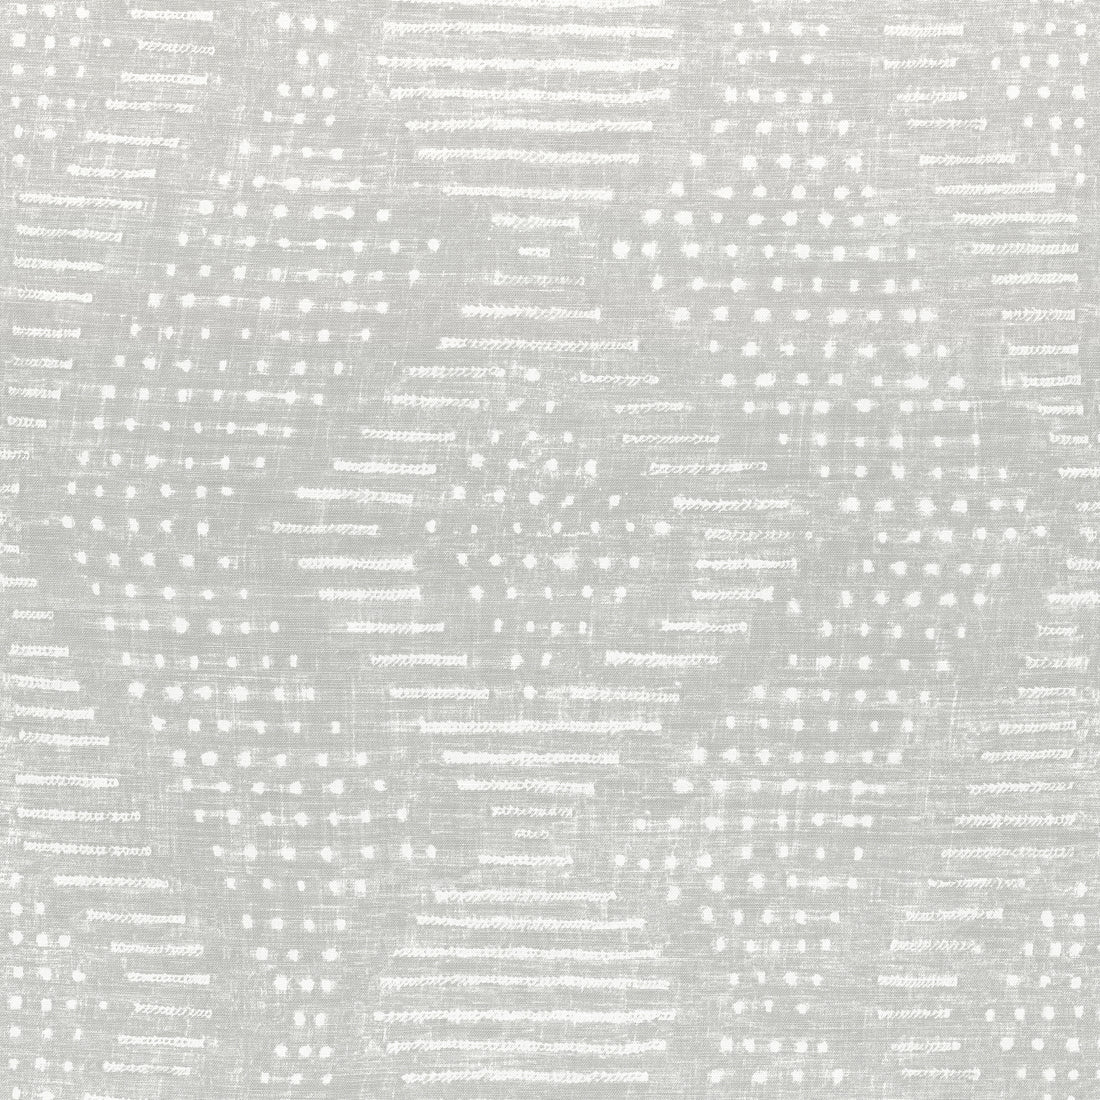 Mali fabric in grey color - pattern number AF78717 - by Anna French in the Palampore collection